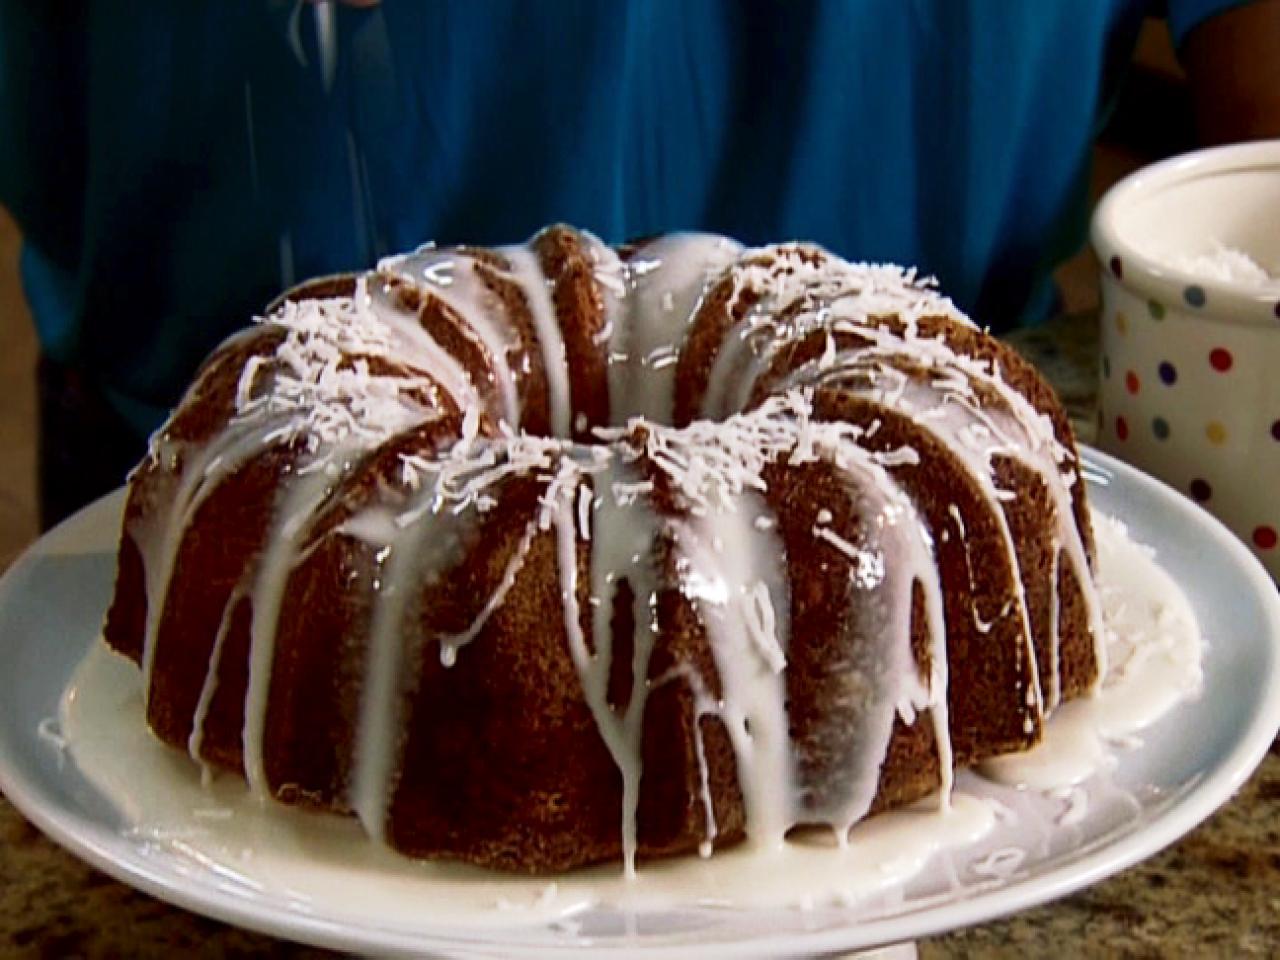 Coconut Chiffon Bundt Cake with Coconut Frosting Recipe - Joanne Chang